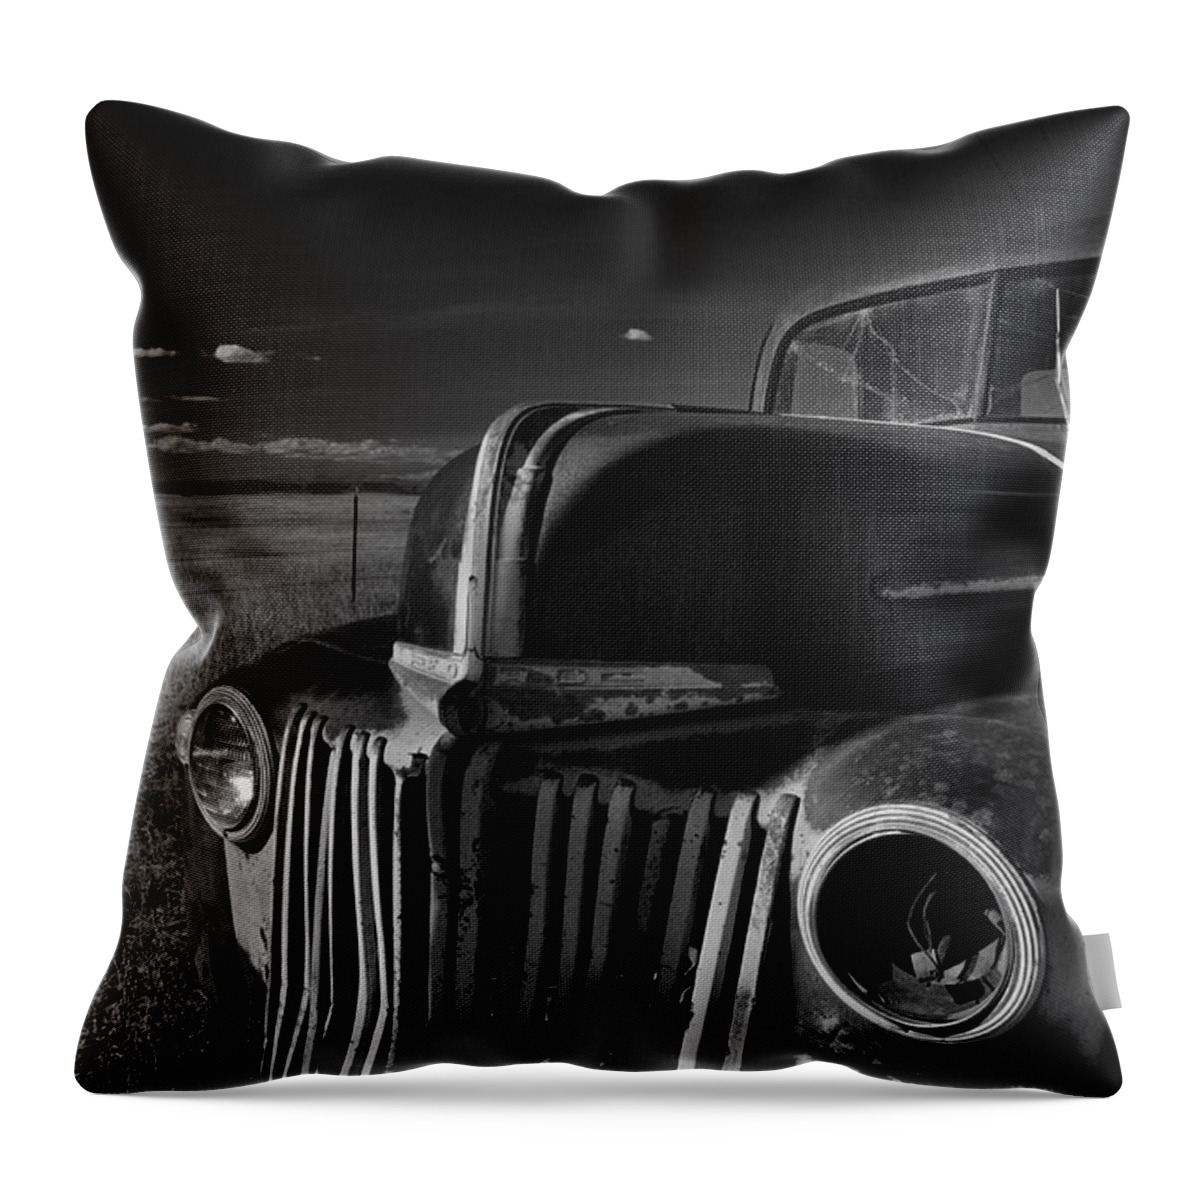 Abandoned Throw Pillow featuring the photograph Classic Rust by Ron Cline